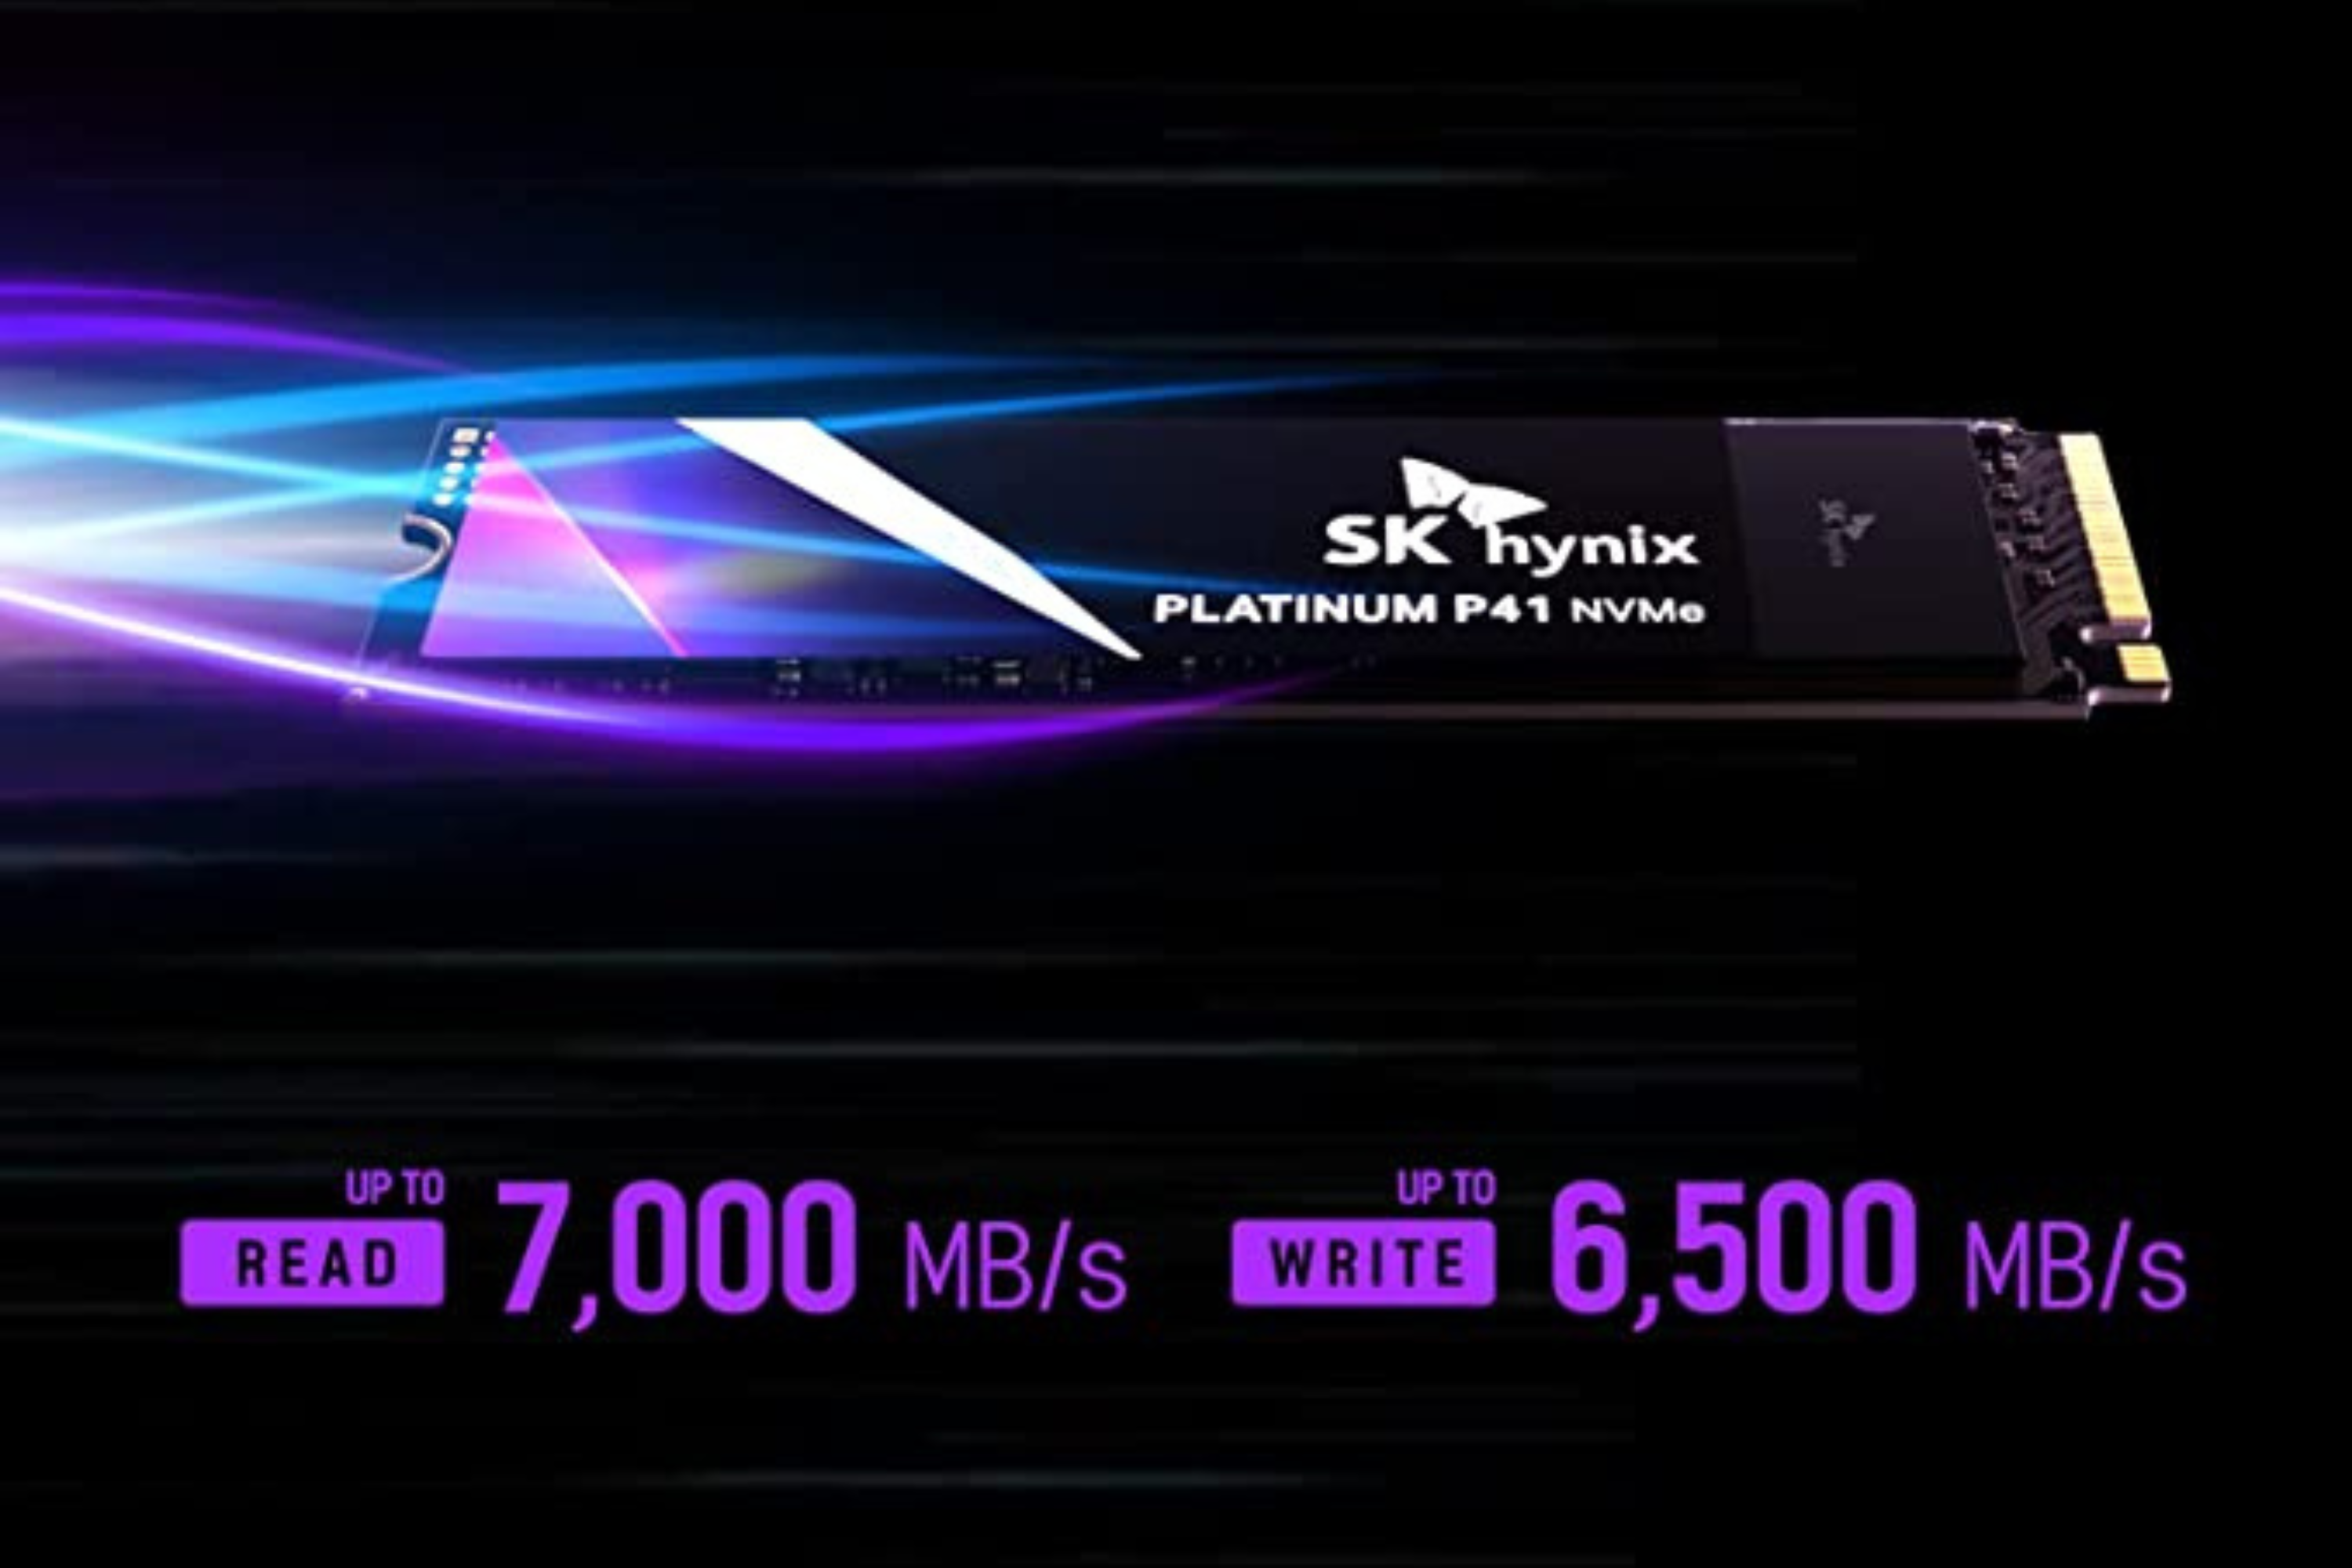 Upgrade your PC or PS5 with this lightning-fast 1TB SK hynix